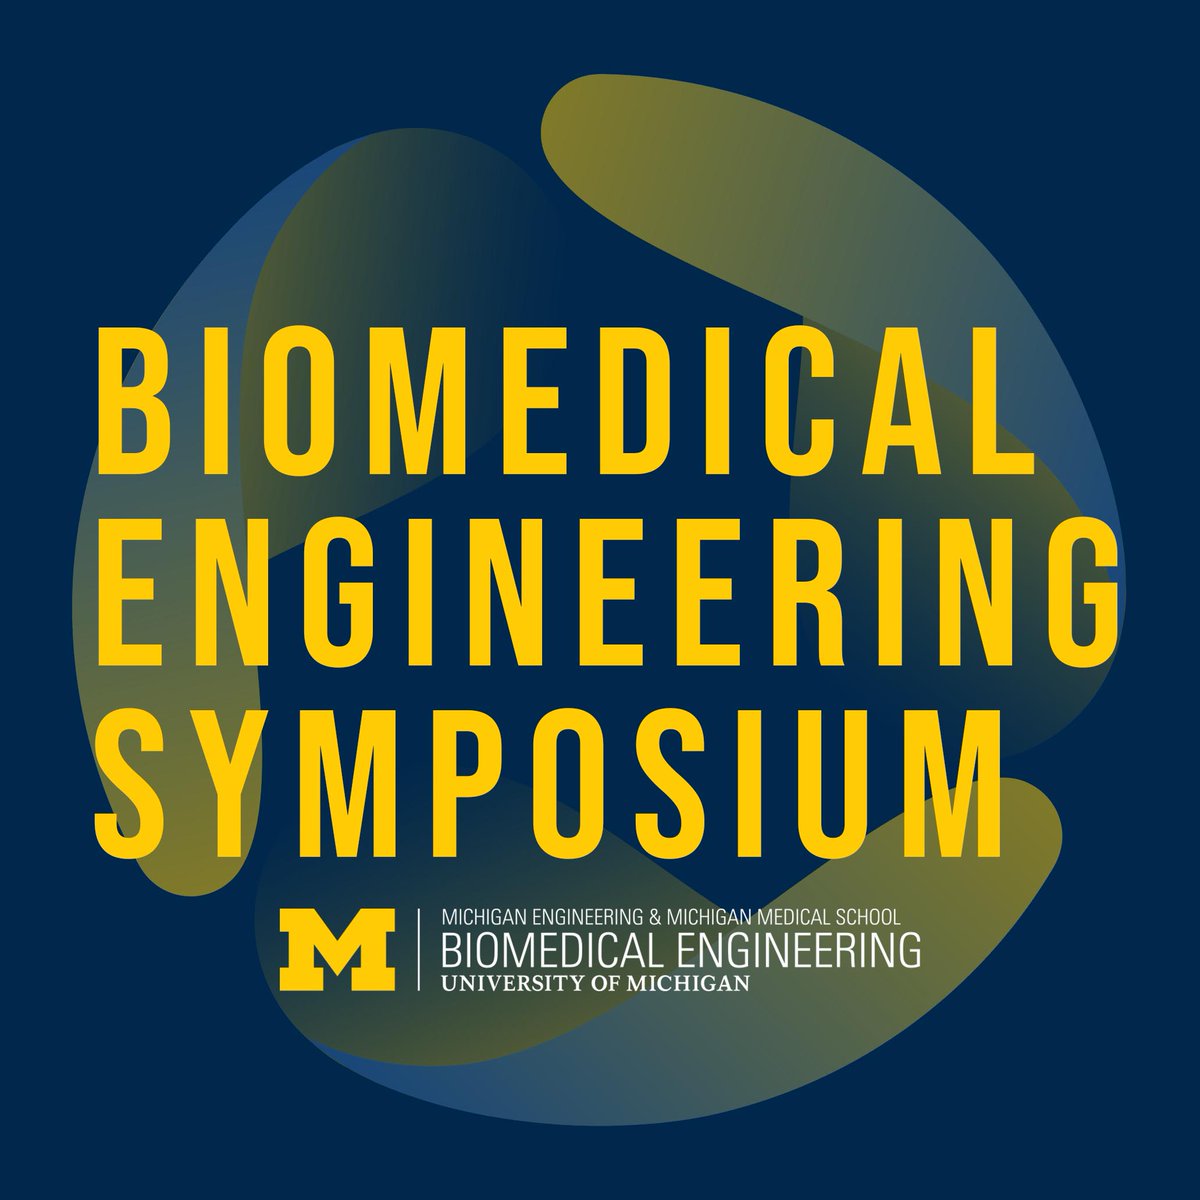 U-M BME is excited about tomorrow's BME Symposium with Glenn V. Edmonson Lecture, featuring Karl J. Jepsen, Ph.D. In addition to sessions highlighting faculty and student research, activities will include poster presentations and a competition, an expo, and networking.